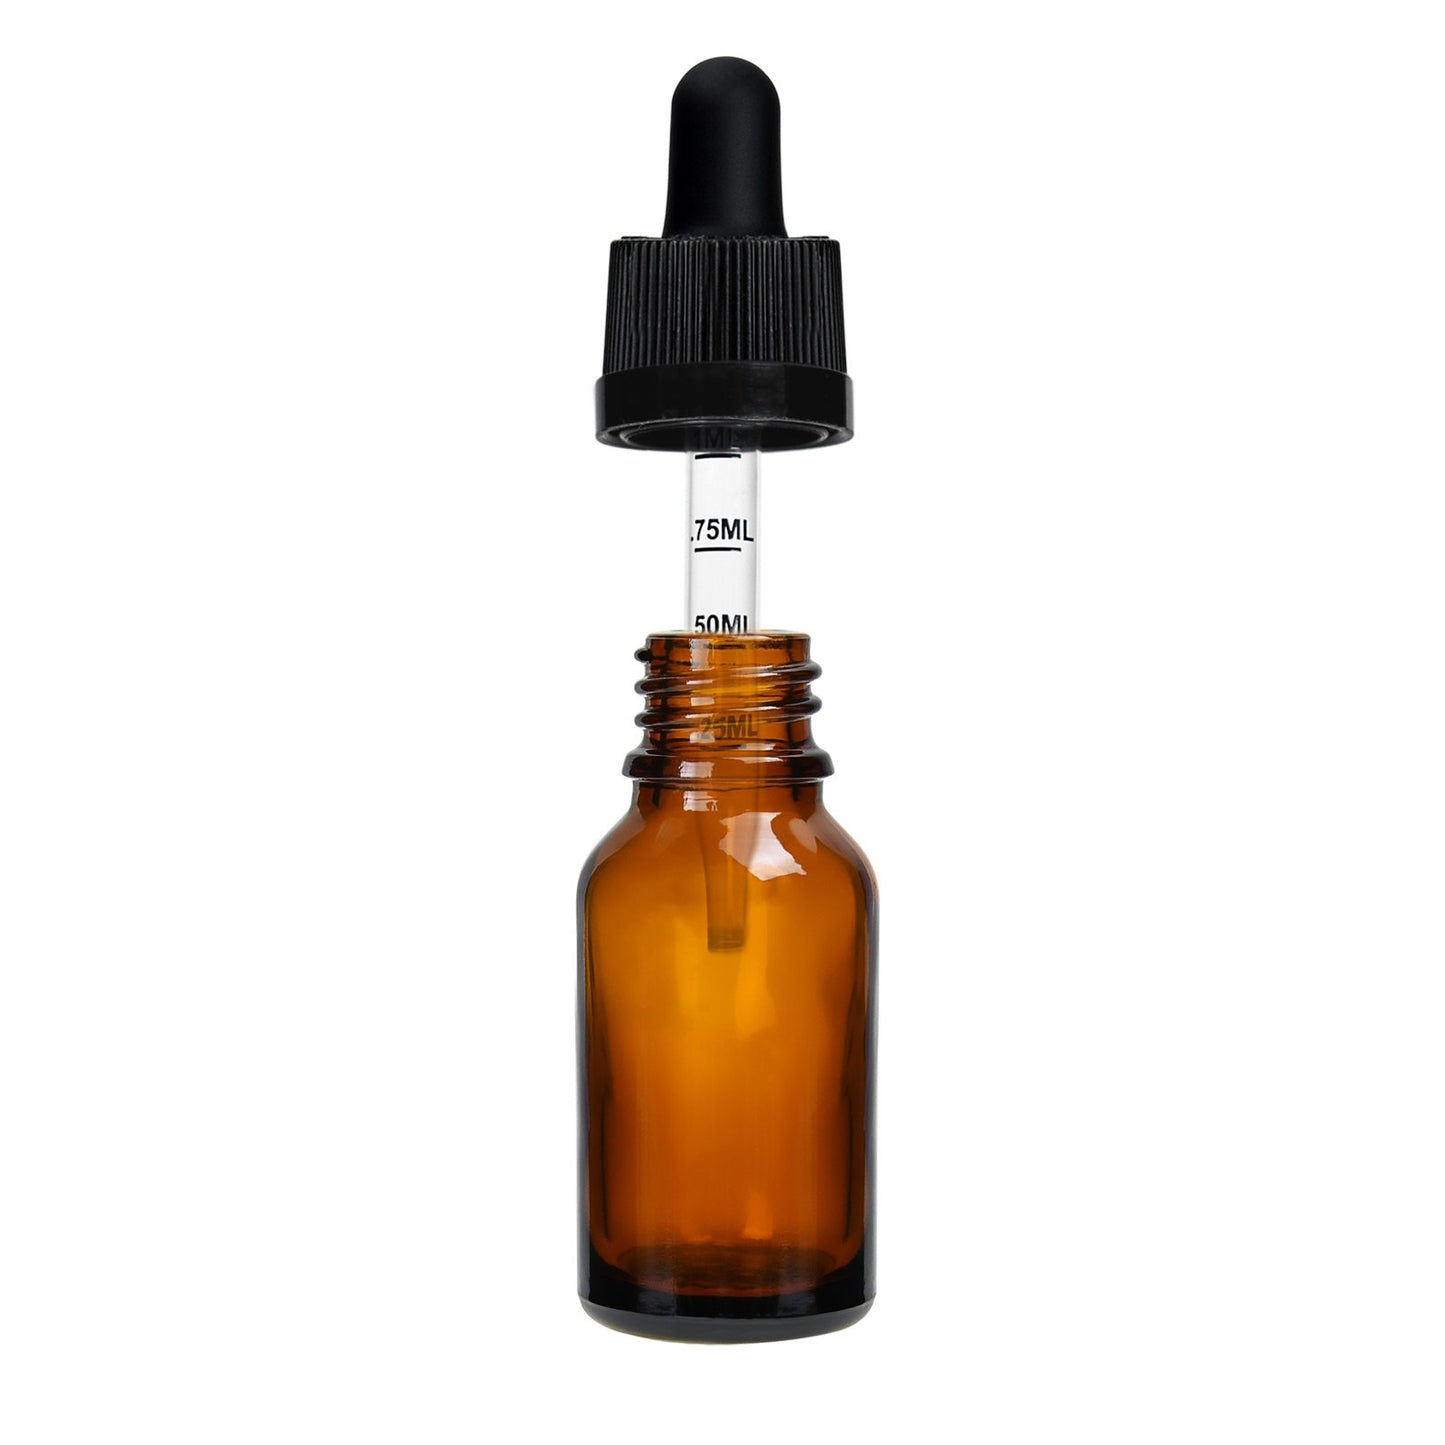 15ML / 0.5OZ Glass Tincture  Amber Dropper Bottles 156 COUNT